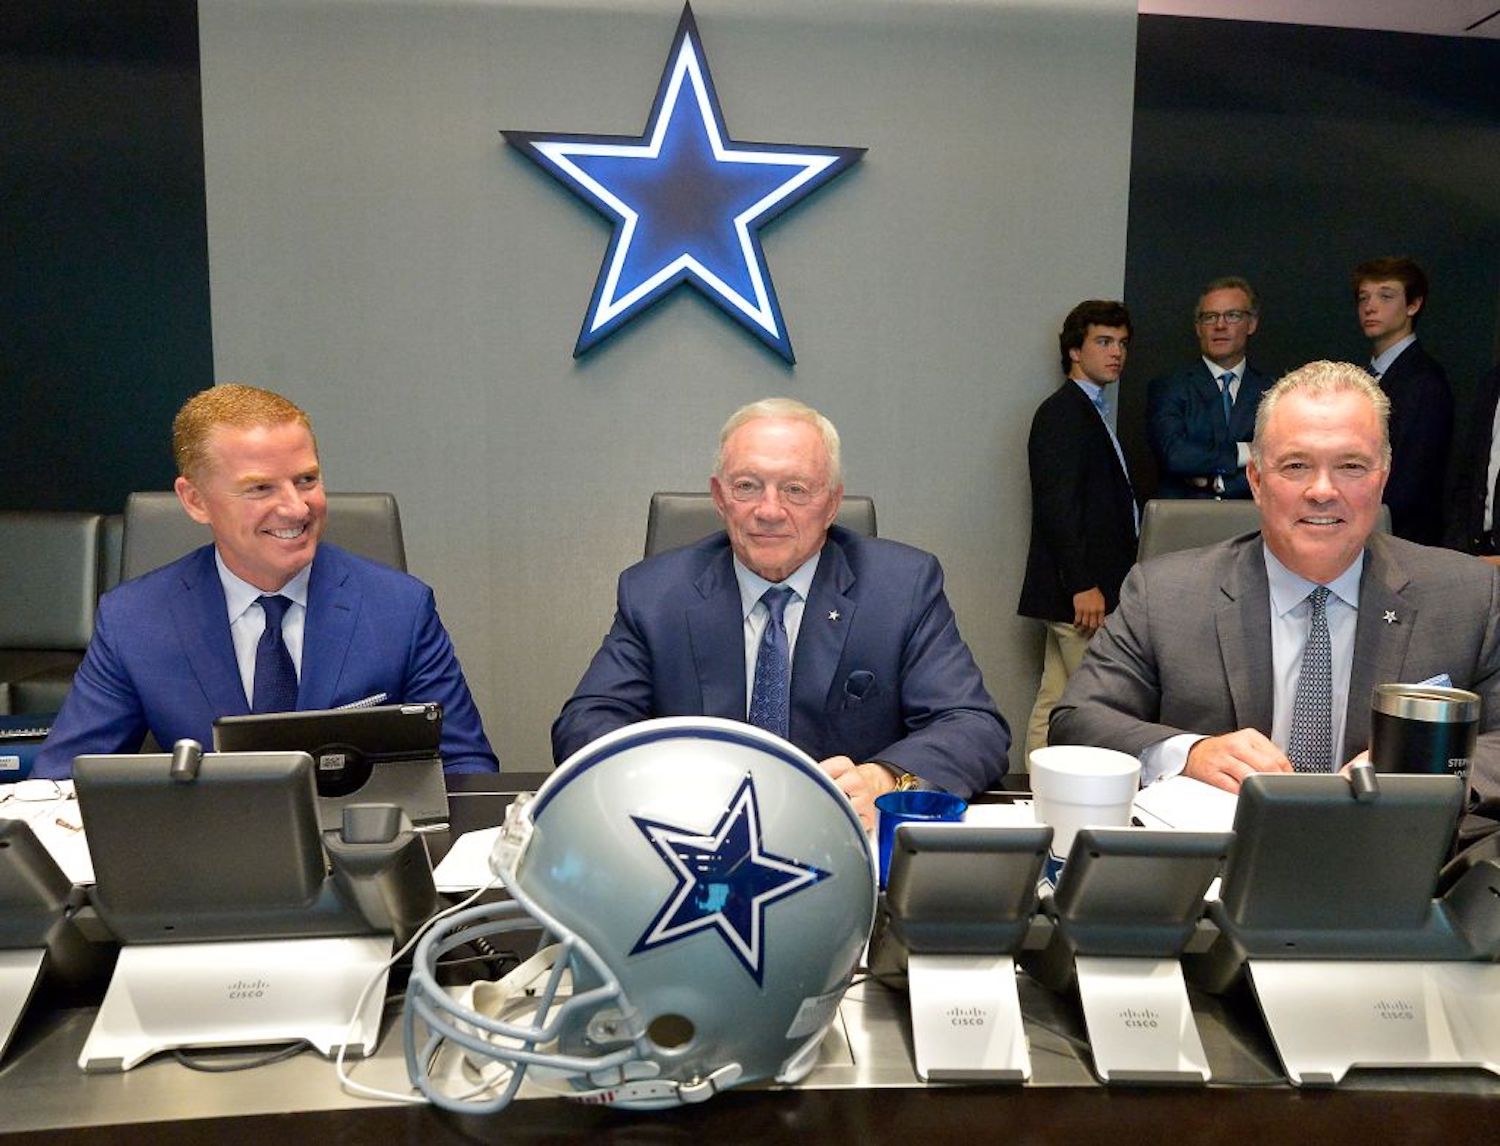 Jerry Jones got the steal of the NFL draft with CeeDee Lamb, but he might never have landed him without the help of his grandson.